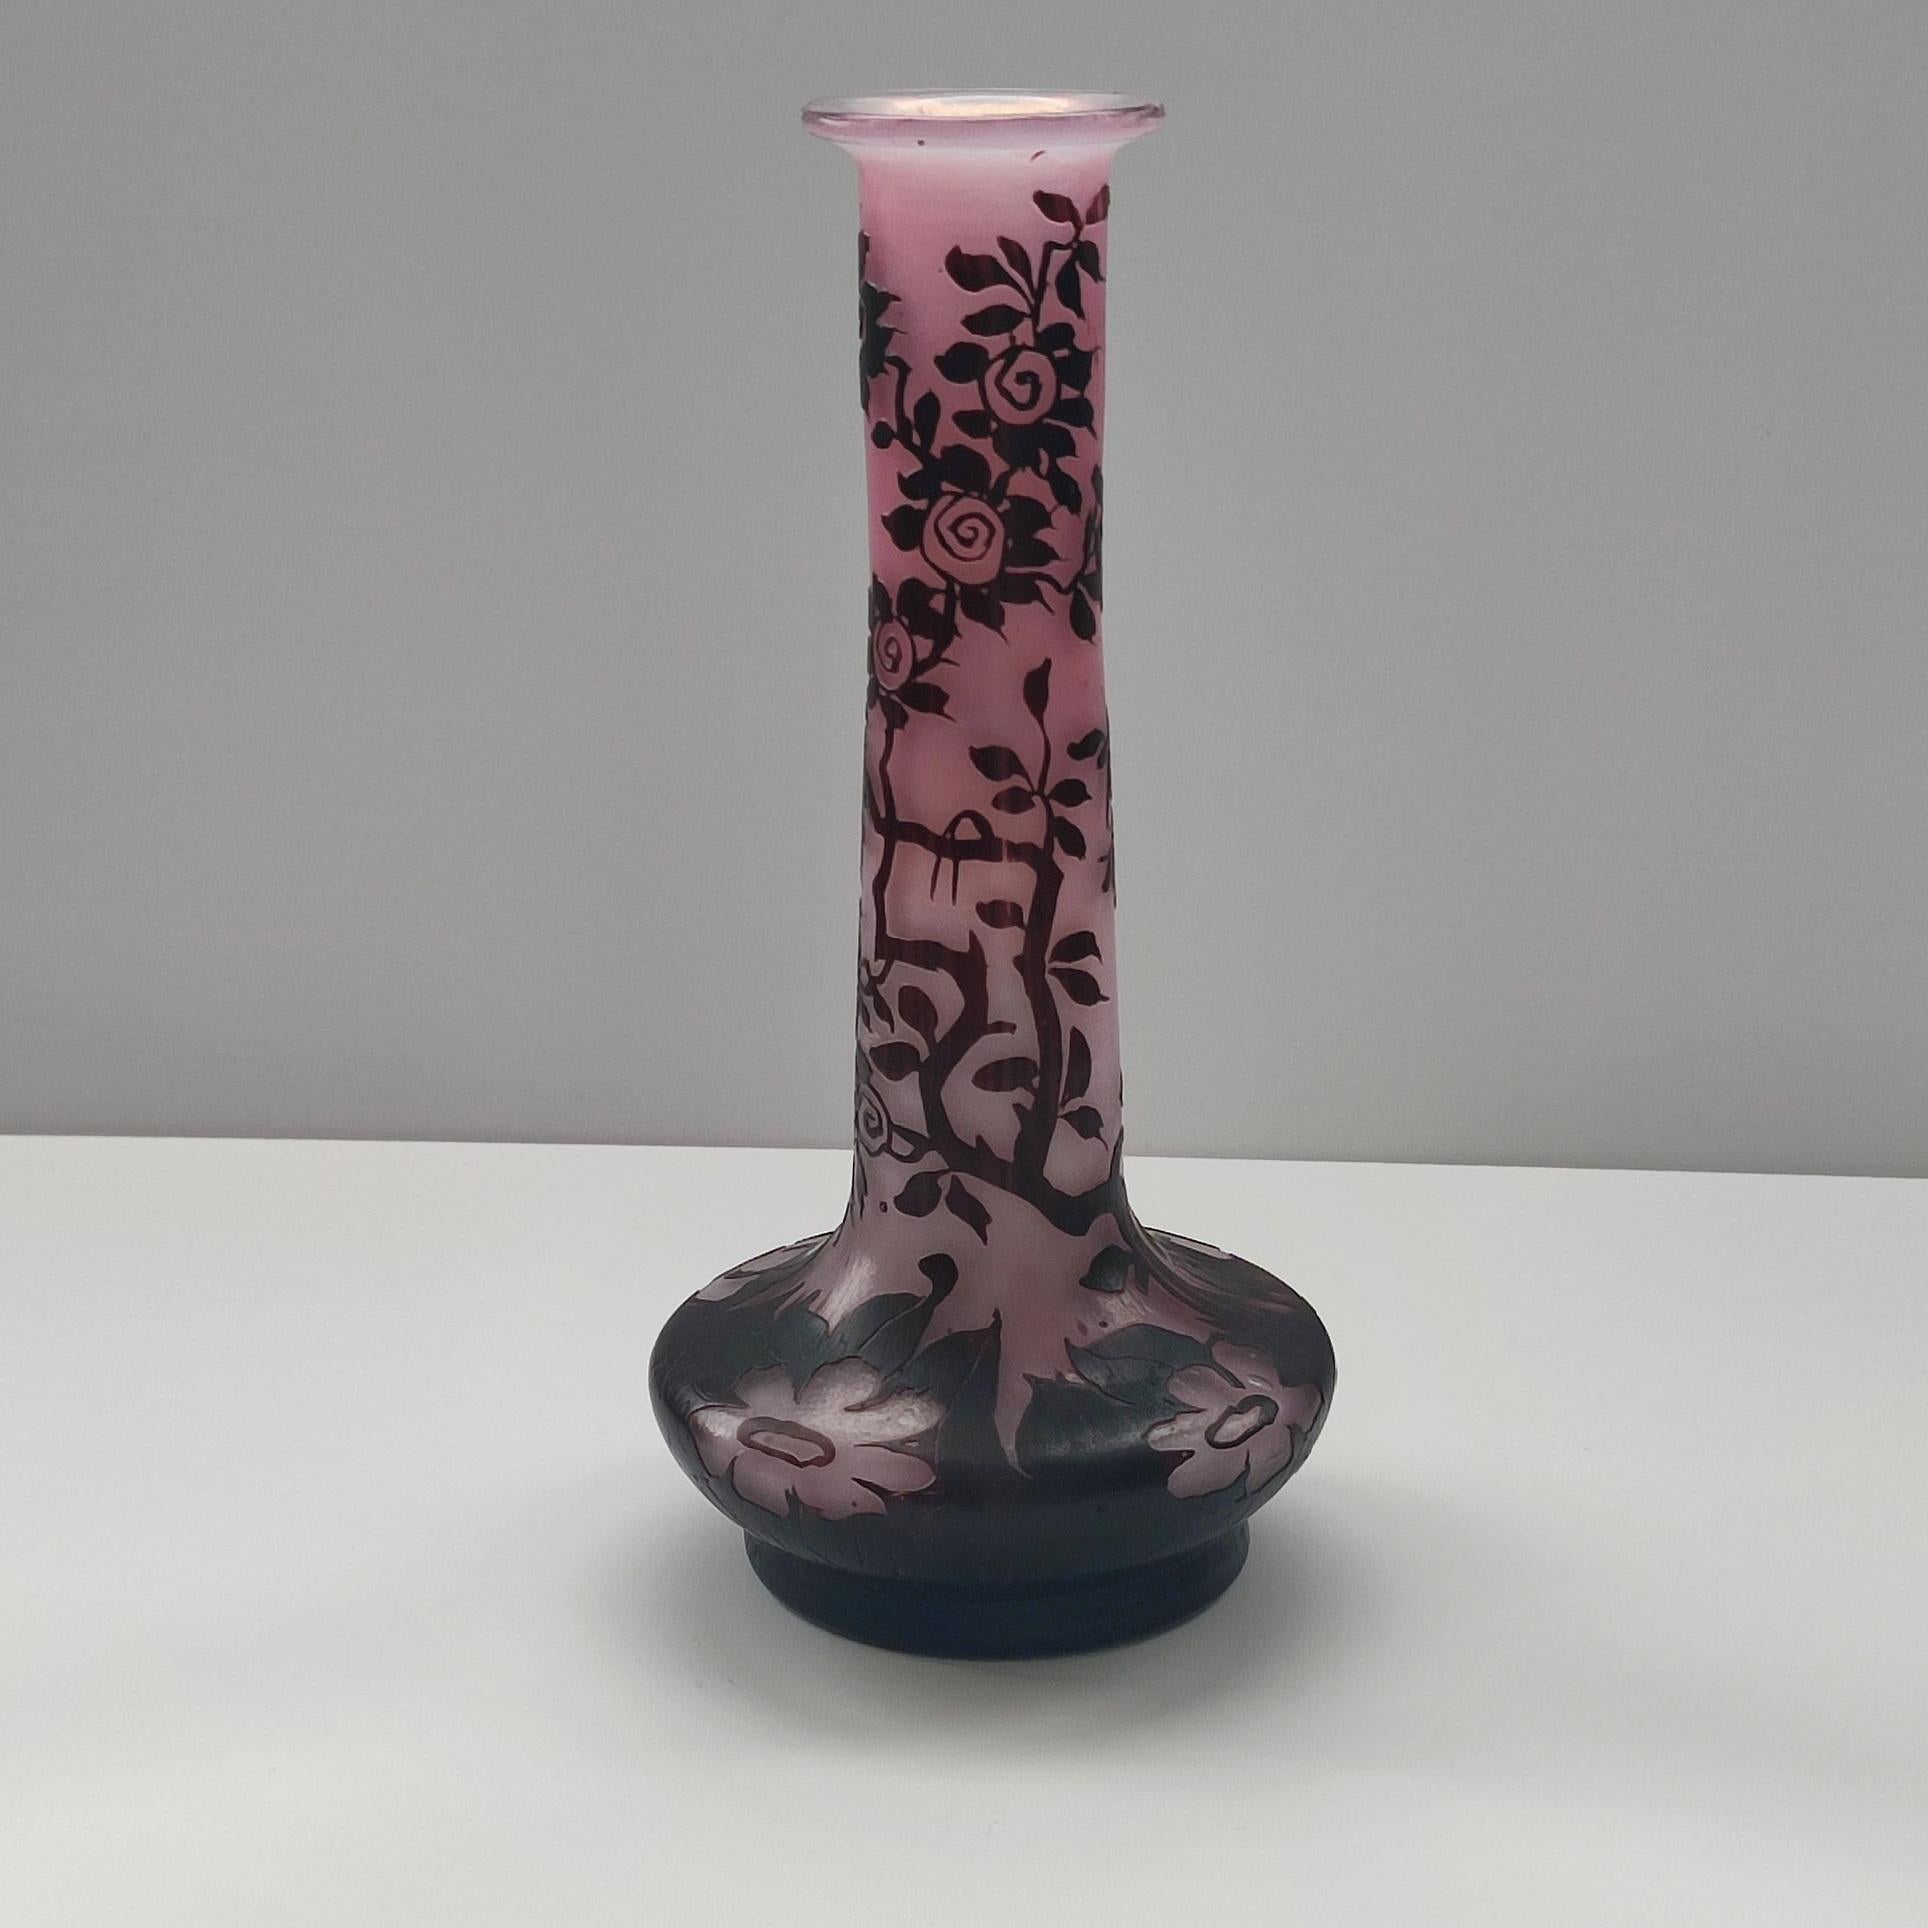 An attractive early 20th-century cameo glass vase acid cut and hand etched with birds, floral and foliage decor in a deep brown against a pink background, exhibiting excellent hand-finished detail, signed De Vez.
A must-have for any Art Nouveau